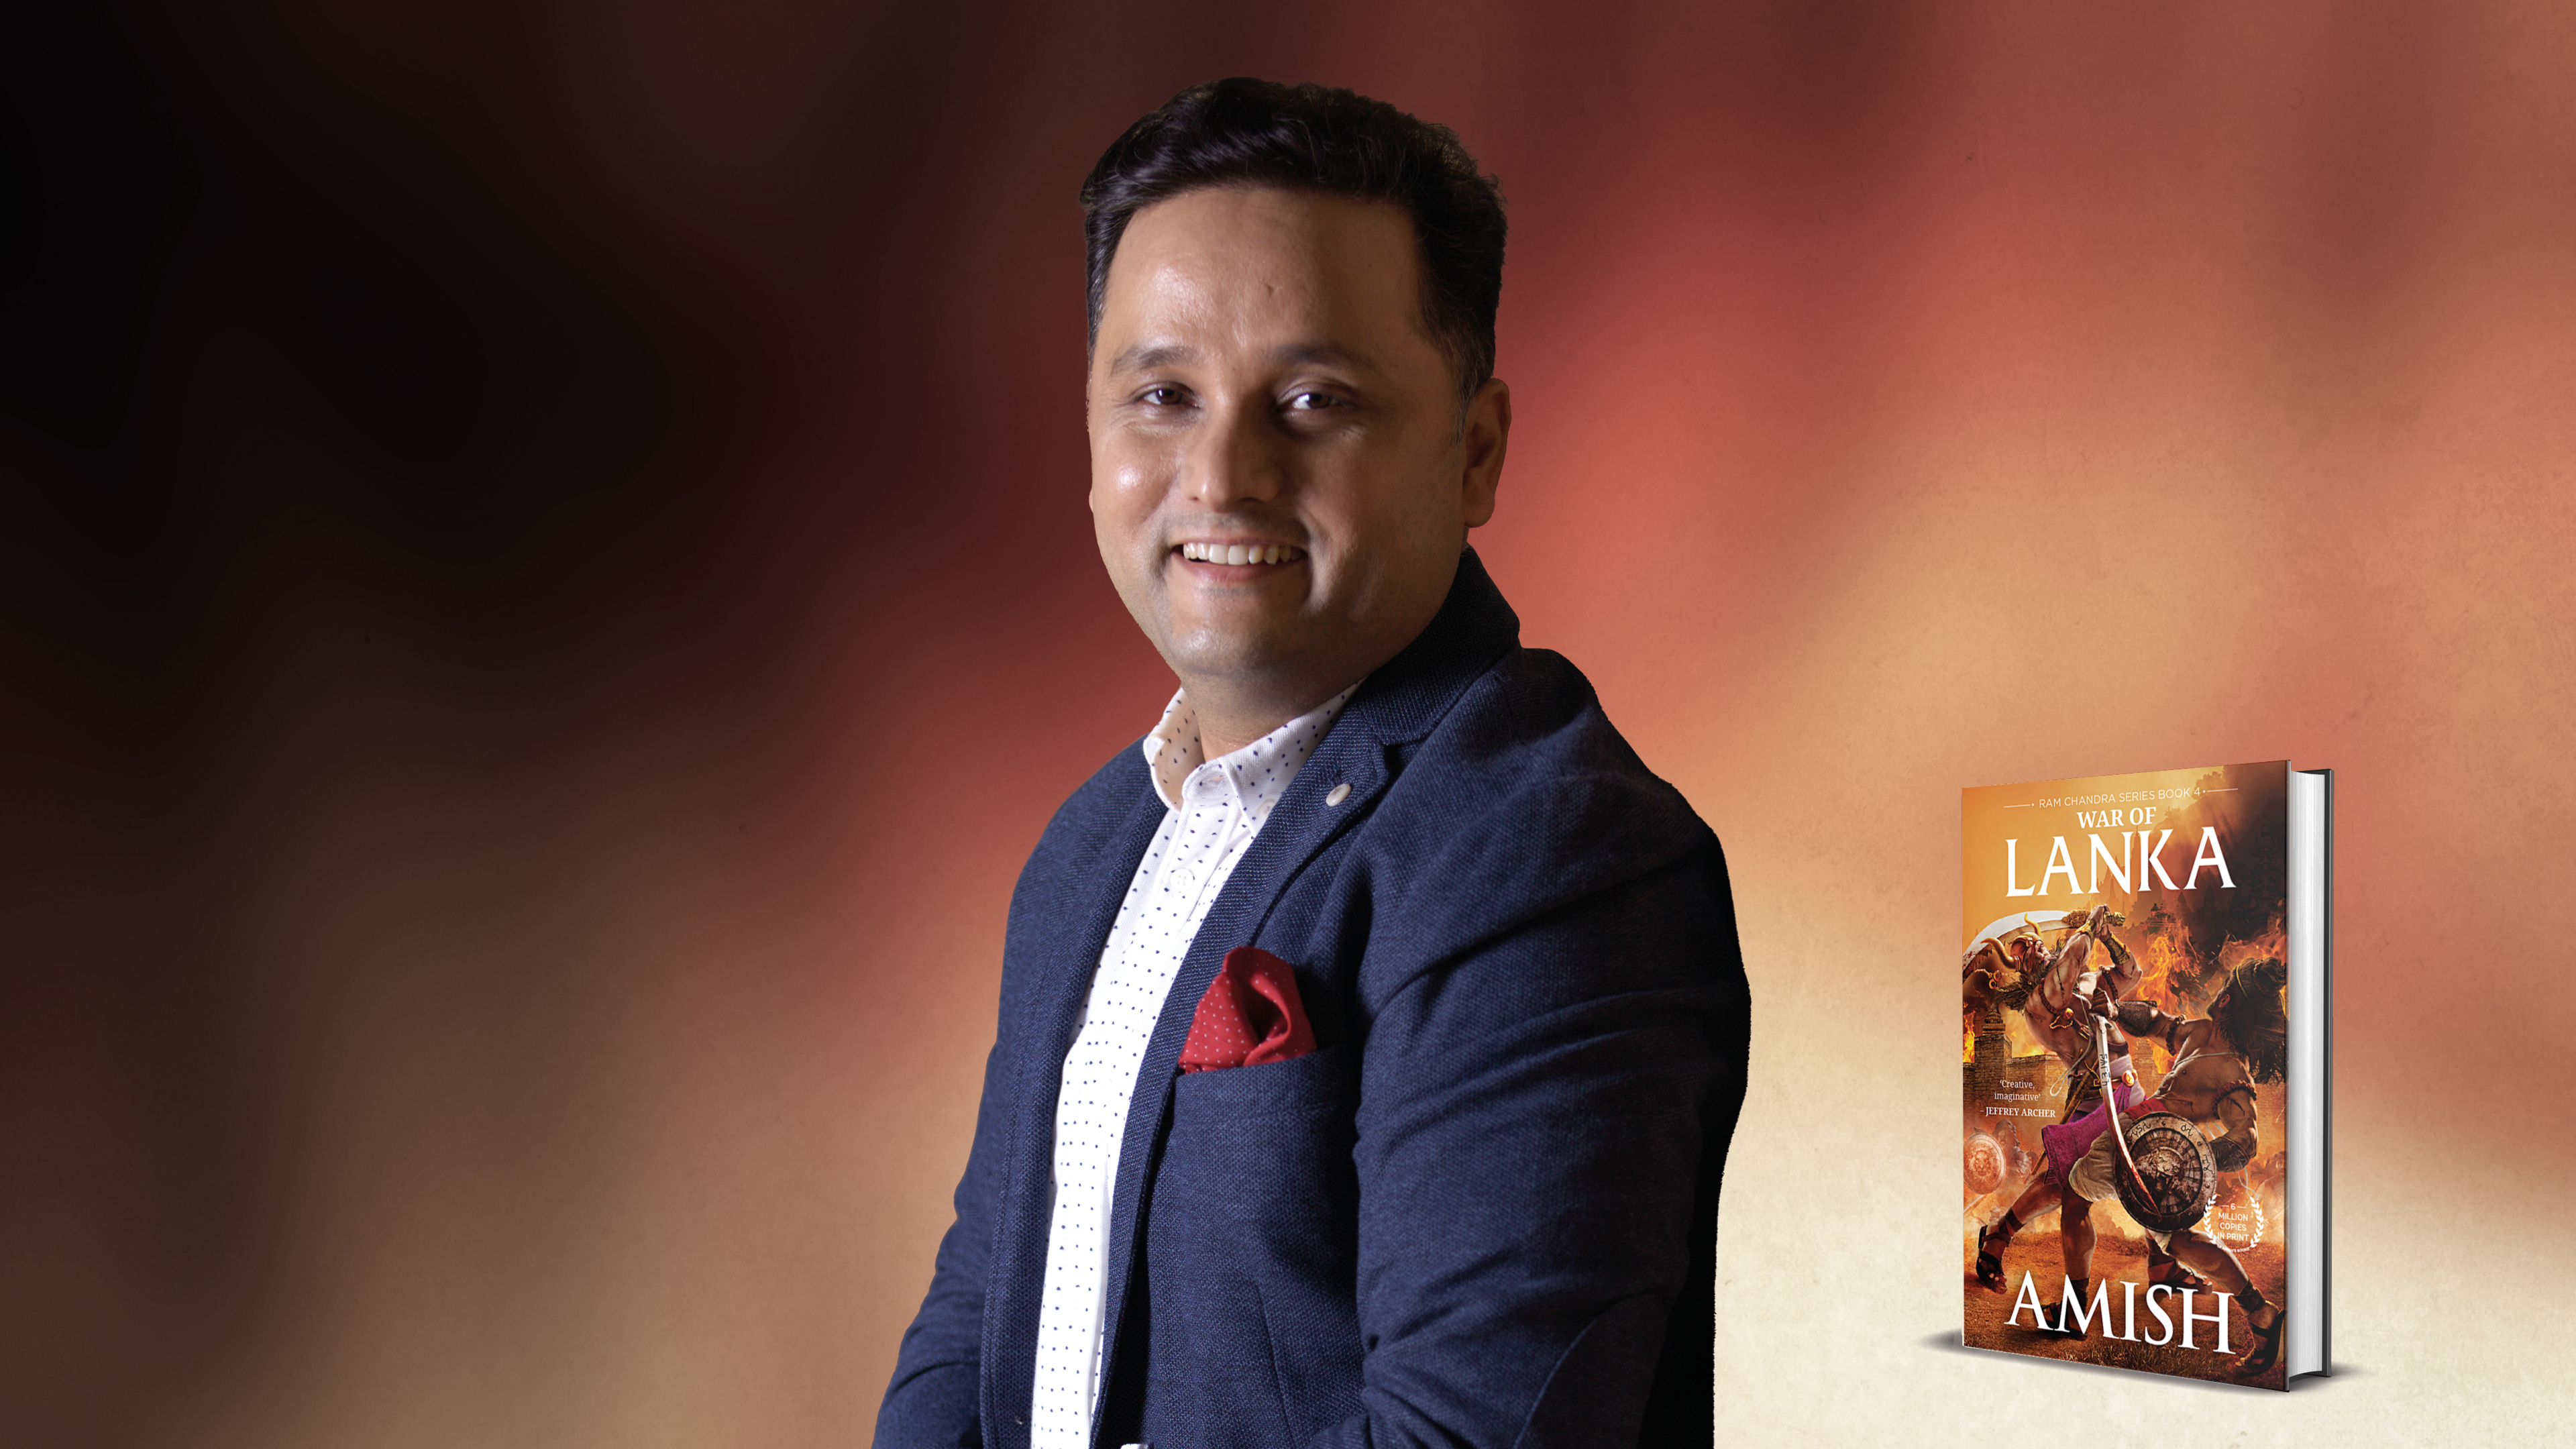 A Night In with Amish Tripathi - Fane